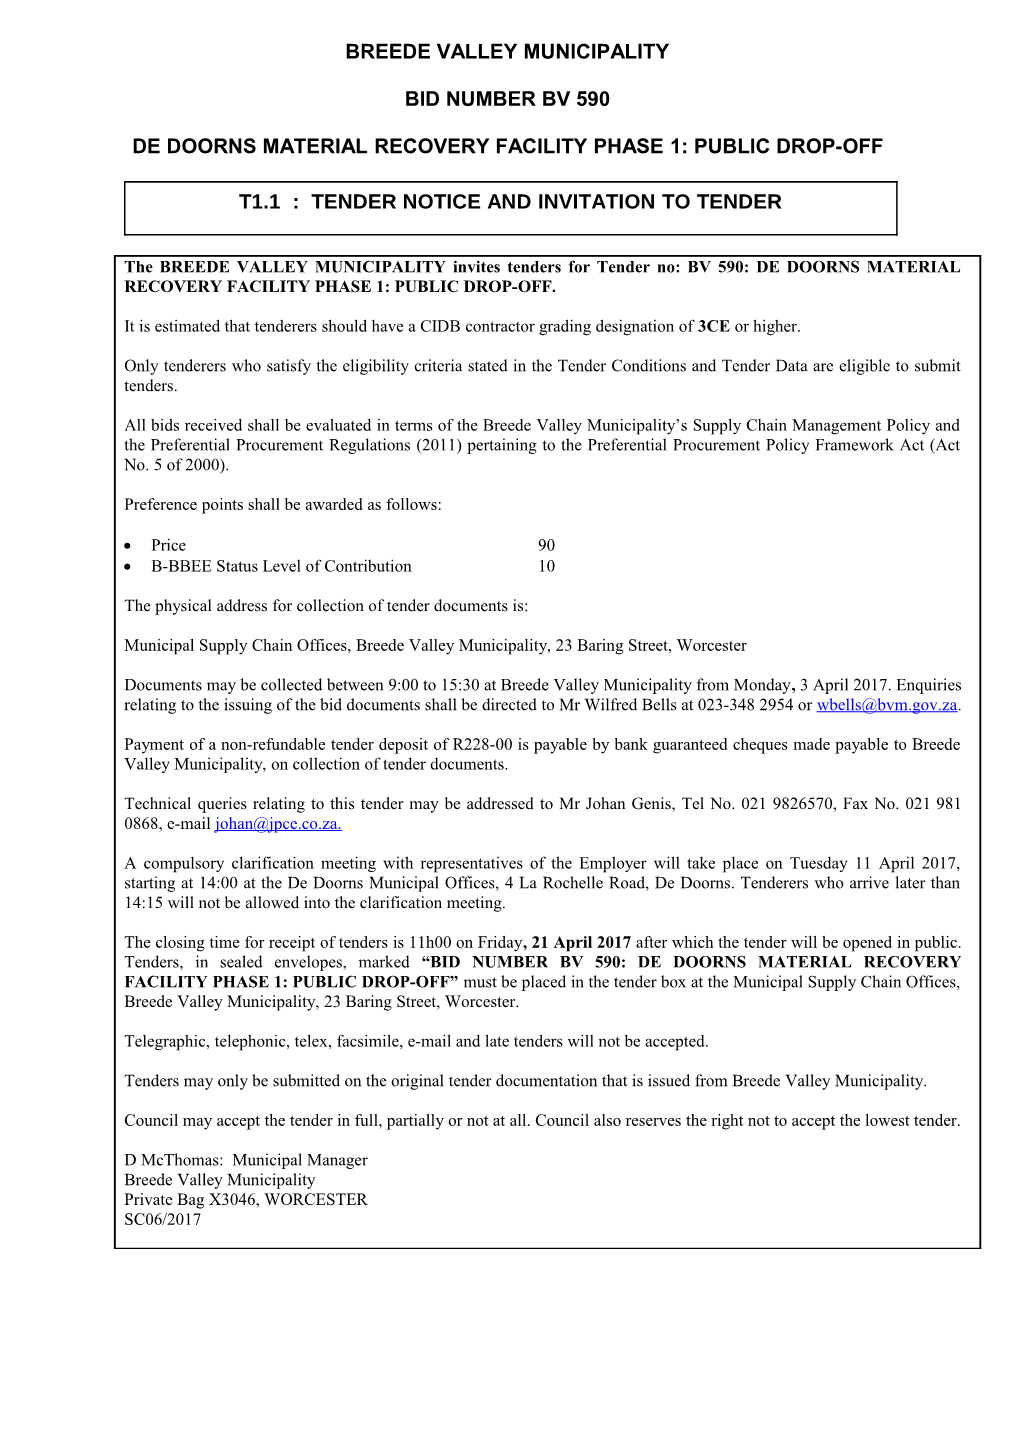 T1.1 : Tender Notice and Invitation to Tender